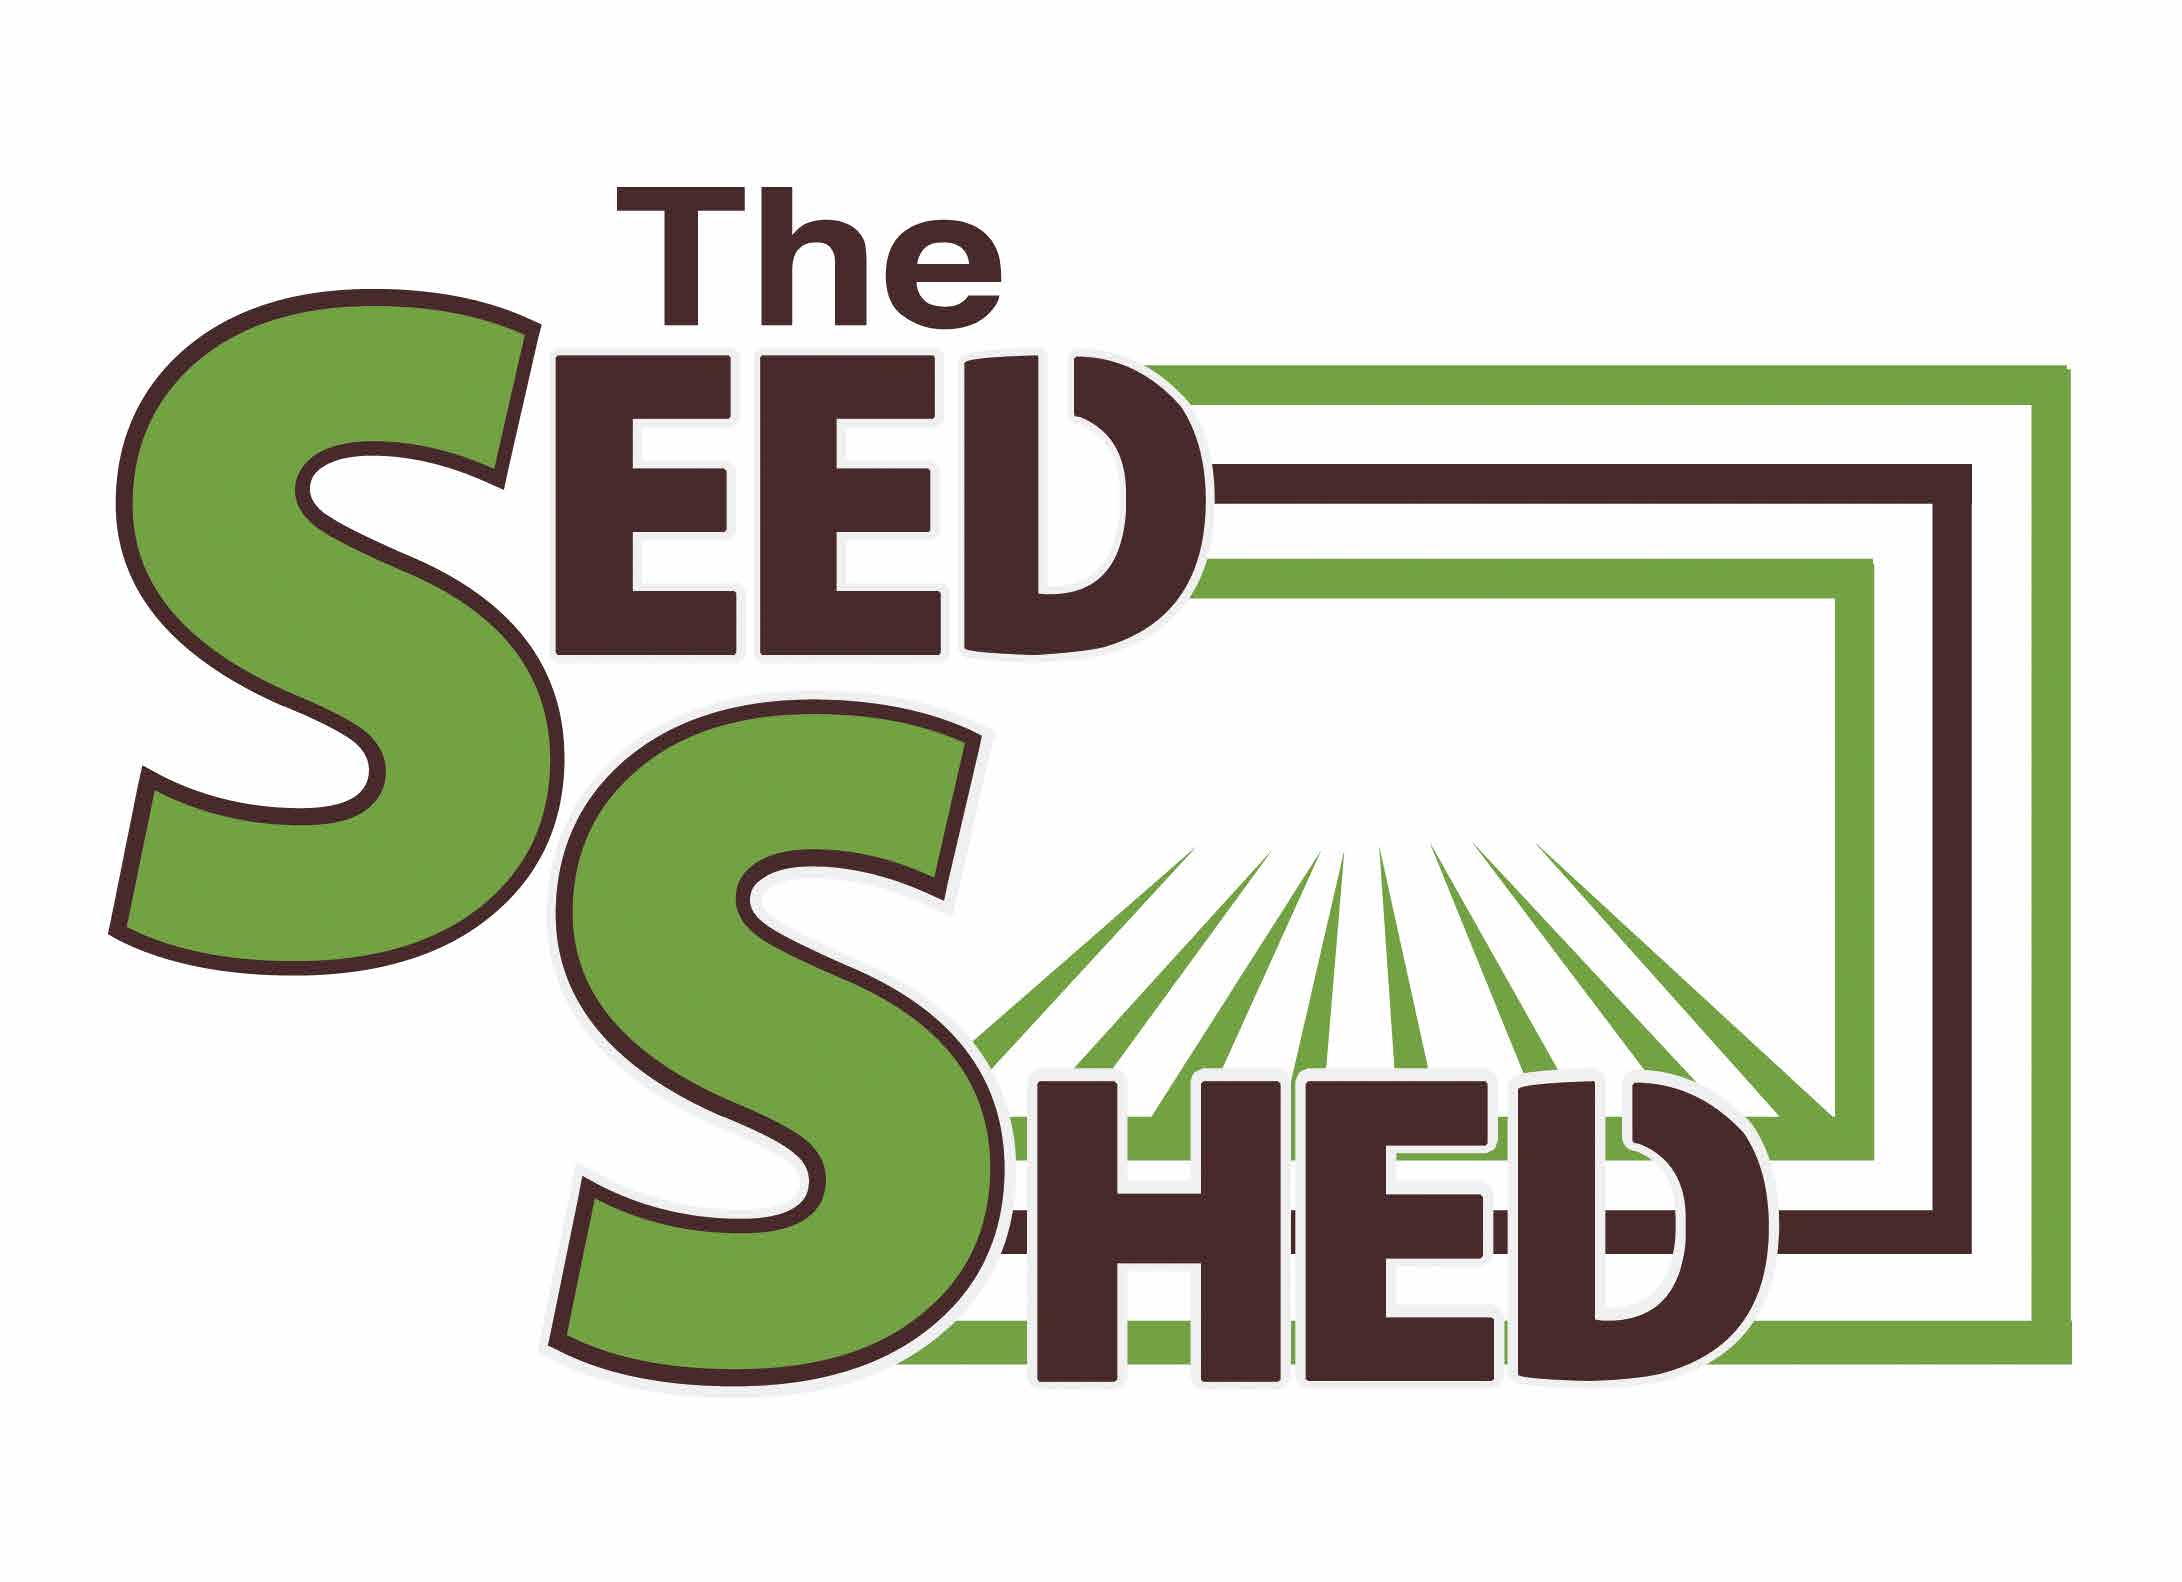 The Seed Shed